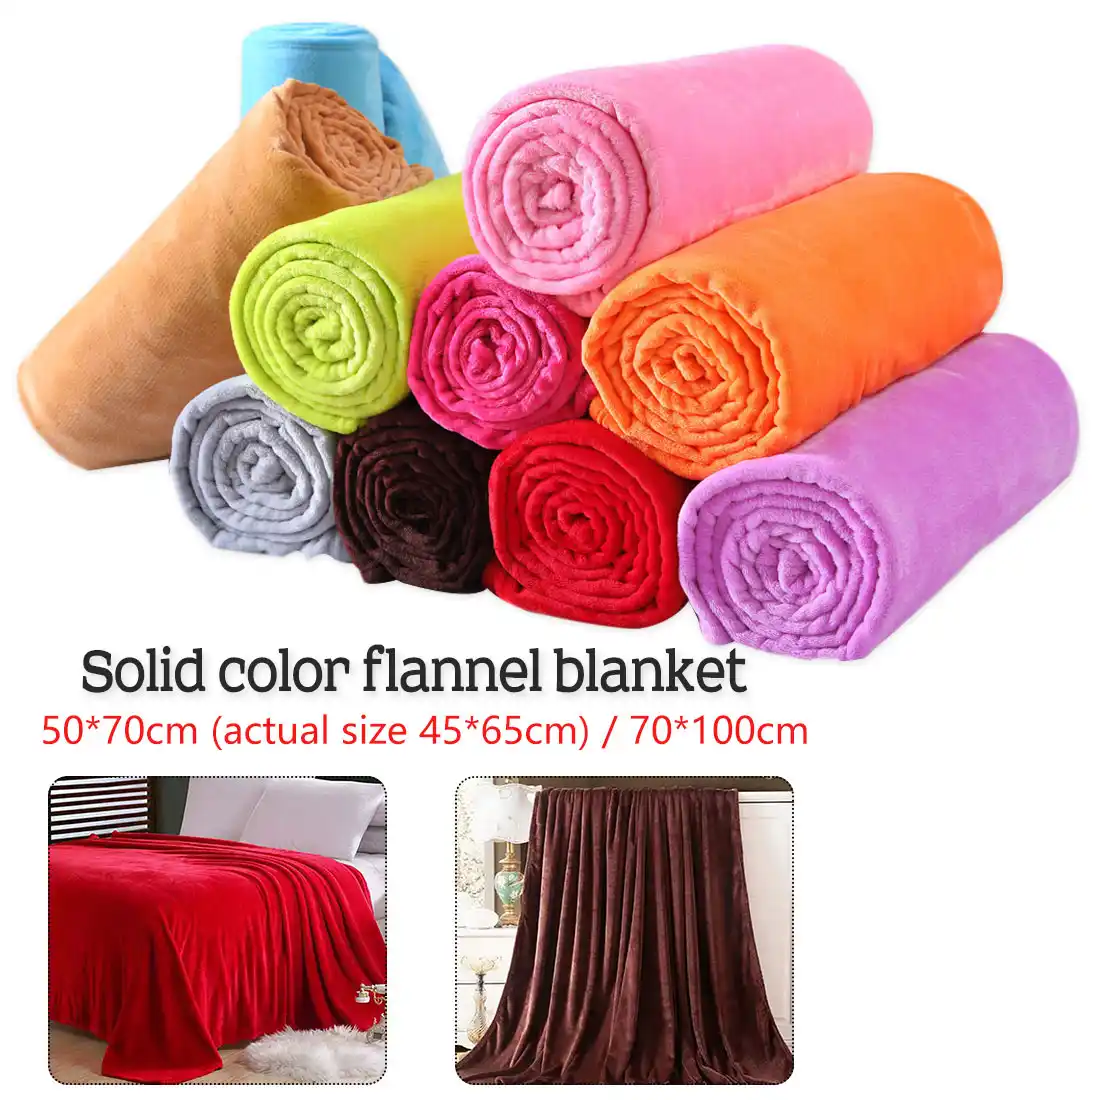 50x70cm 70x100cm Flannel Blanket Super Warm Soft Blankets Throw On Sofa Bed Travel Patchwork Solid Color Bedspread Blankets Aliexpress